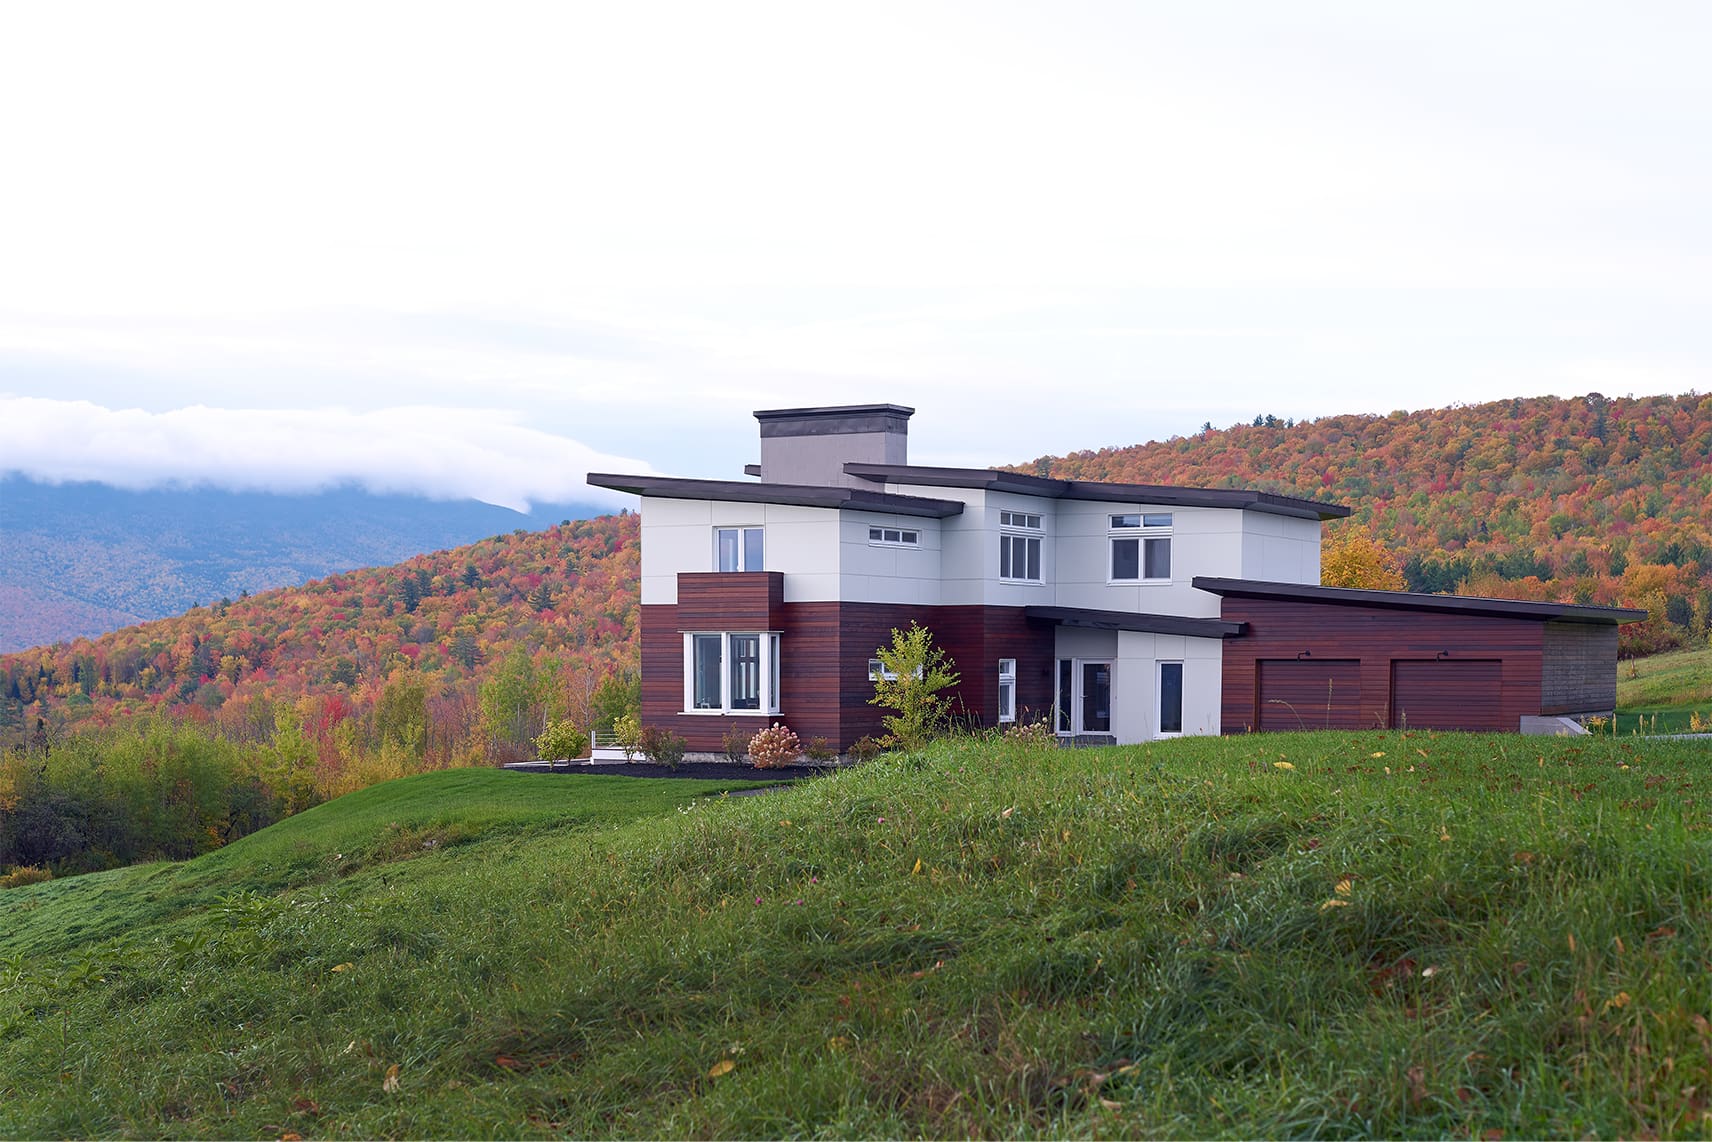 A modern Bensonwood home with a view of fall foliage